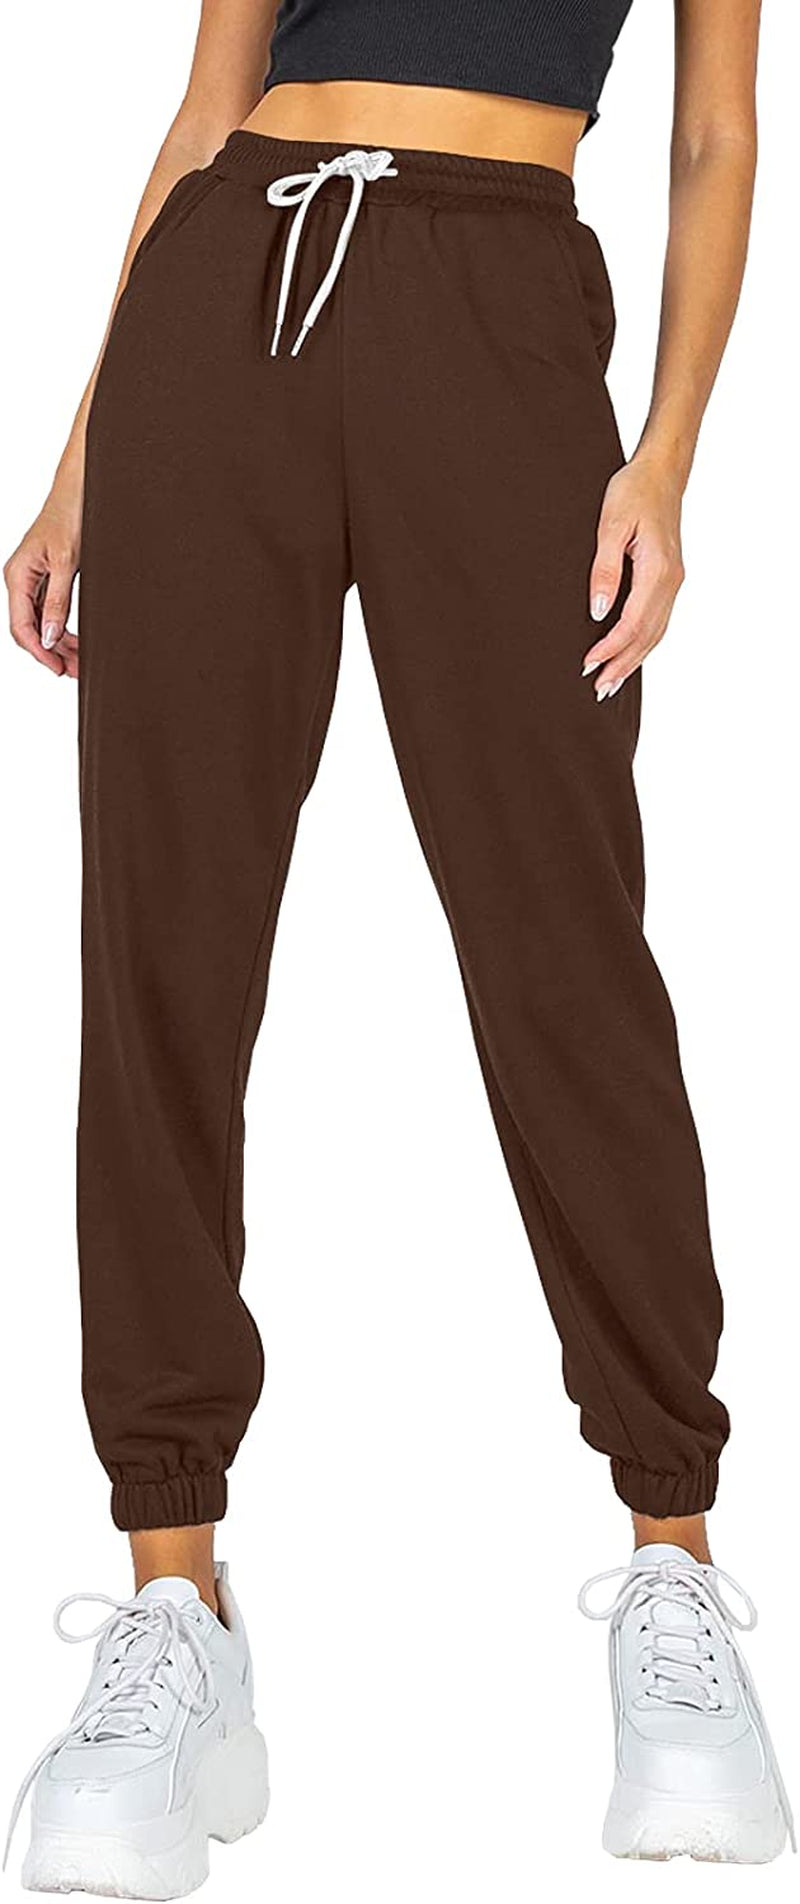 AUTOMET Women'S Cinch Bottom Sweatpants High Waisted Athletic Joggers Lounge Pants with Pockets